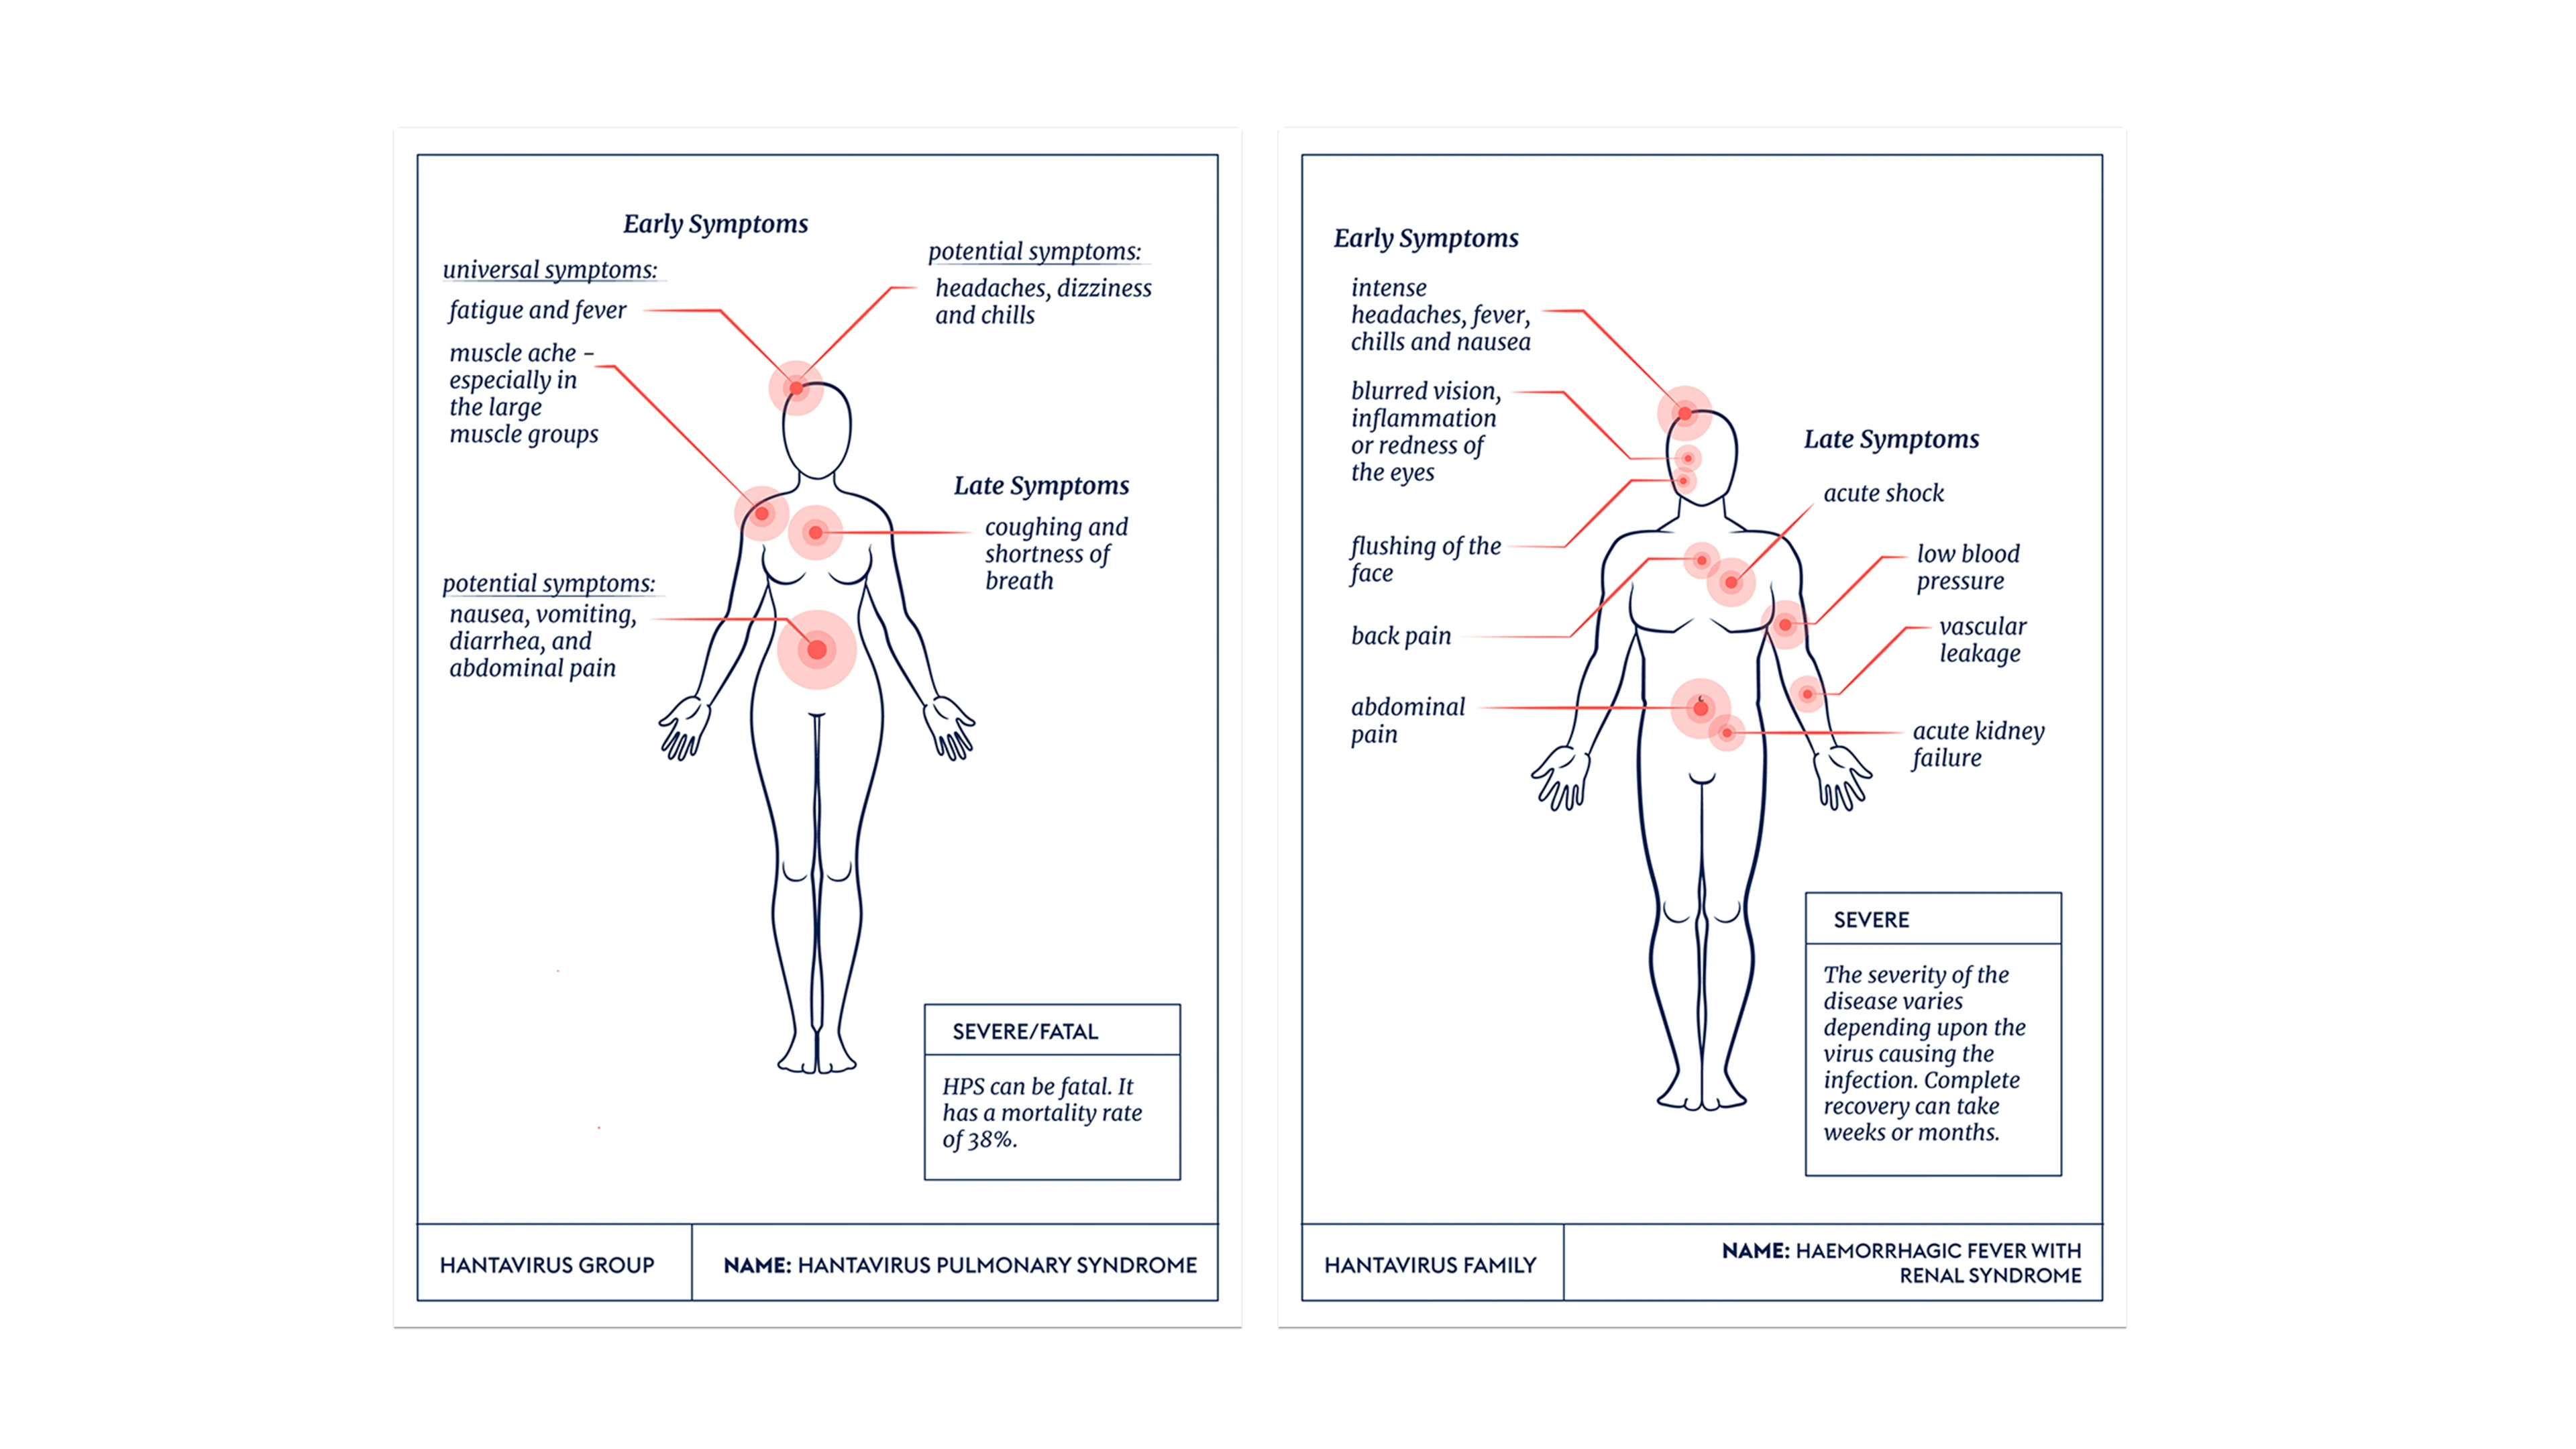 two graphic illustration cards showing symptoms of HPS and HFRS